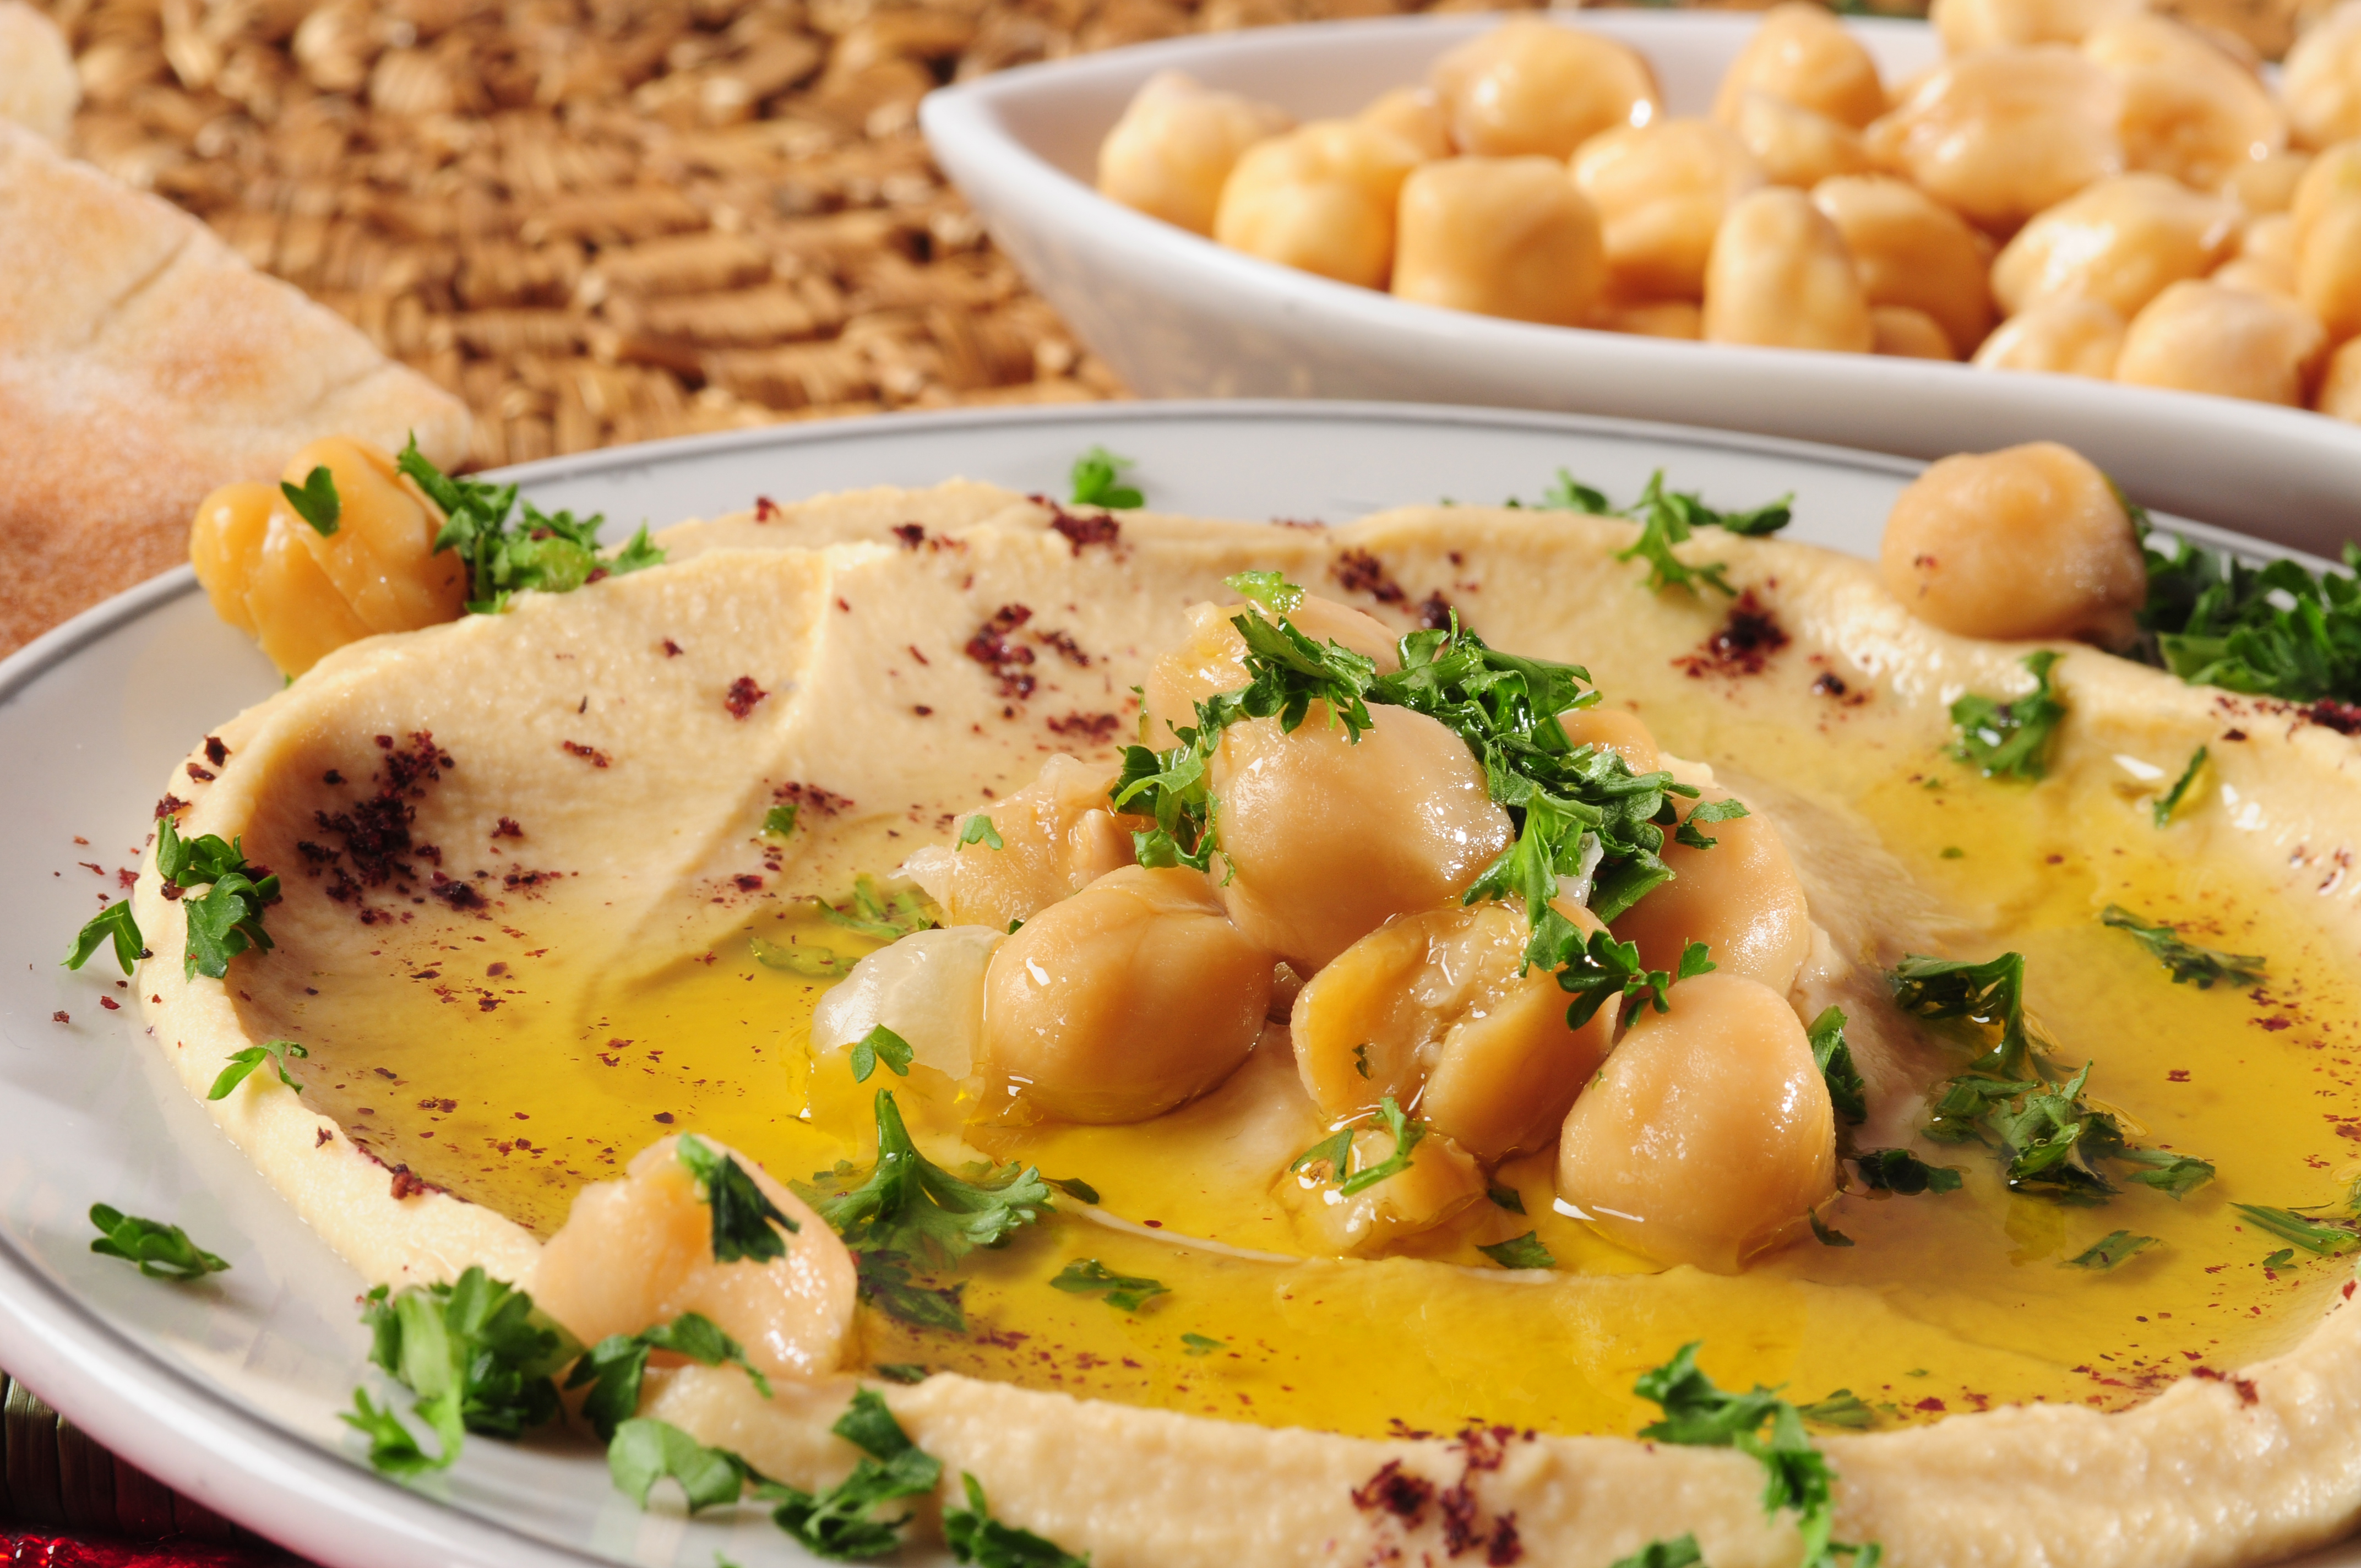 Mashed chickpeas with olive oil and pita bread on the side